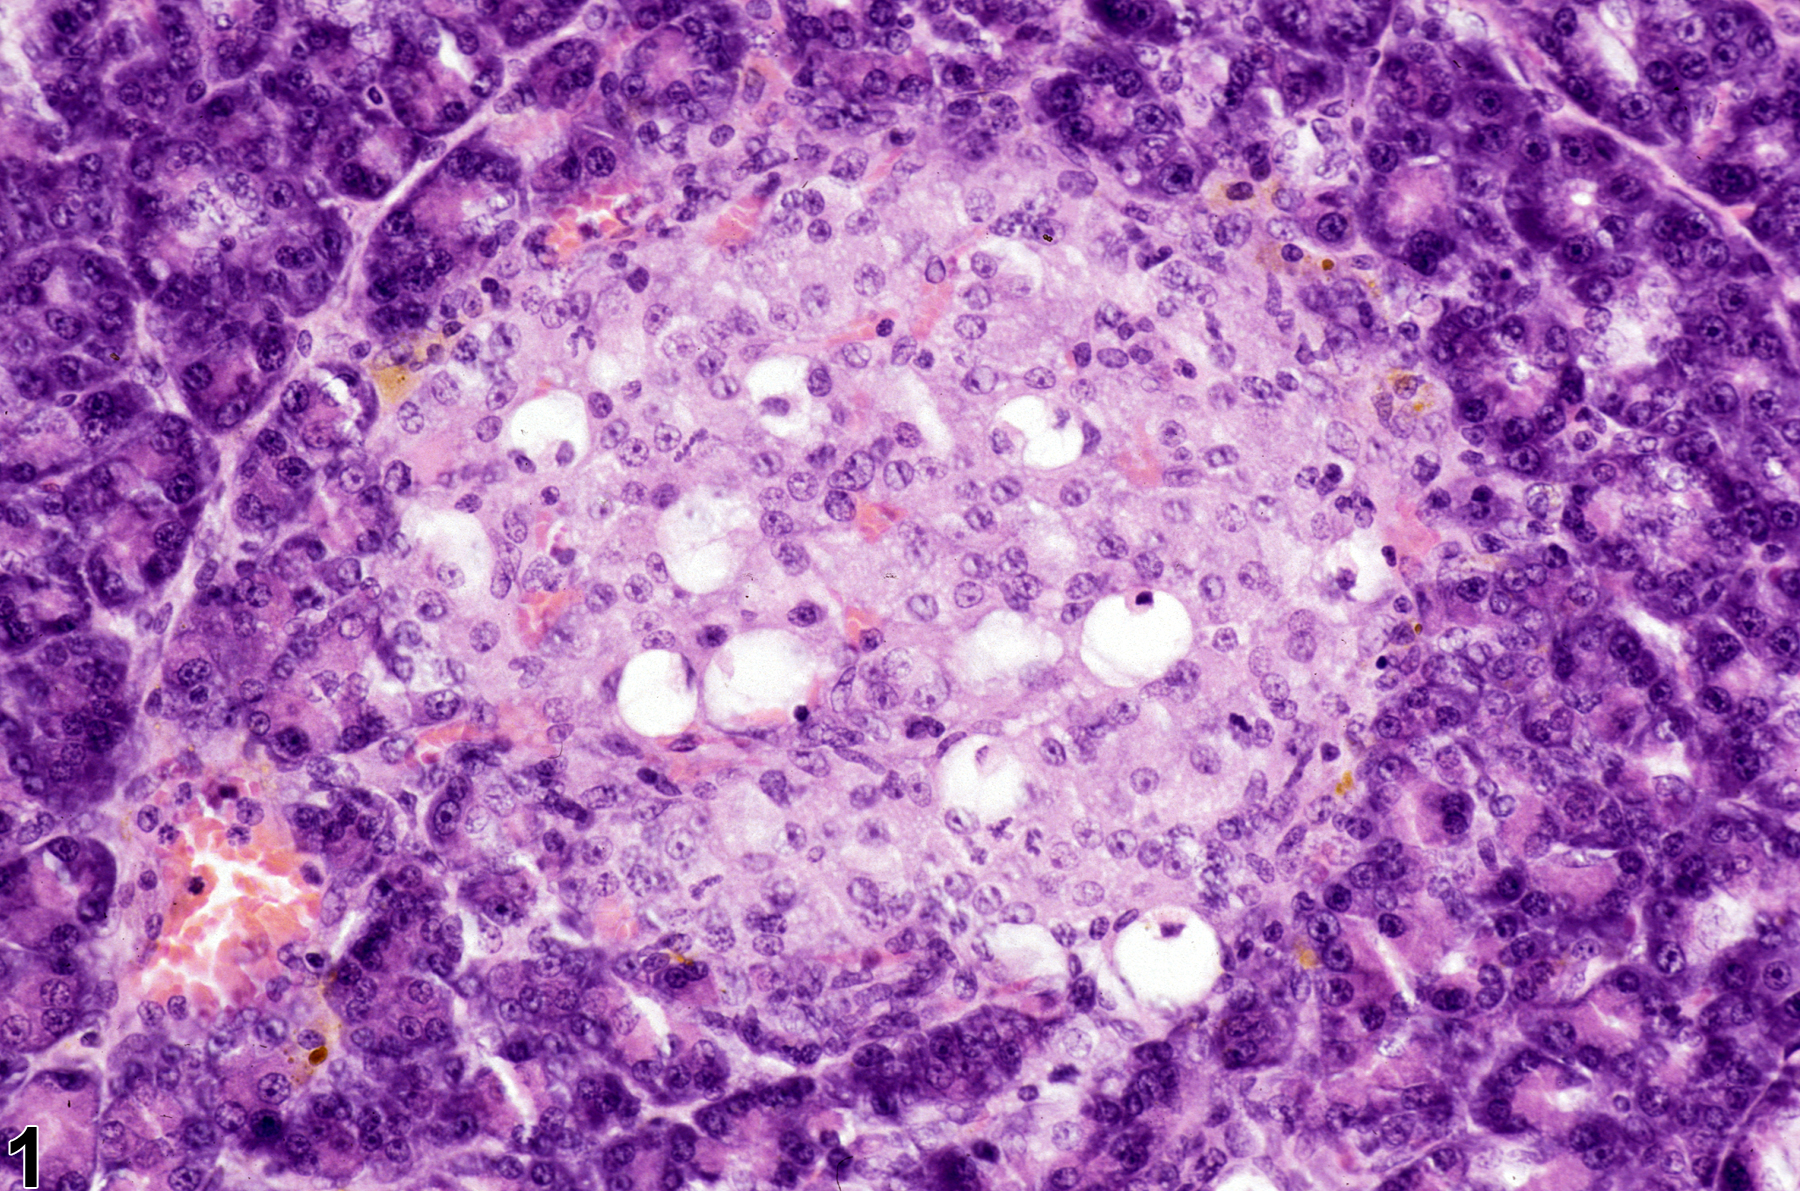 Image of necrosis in the pancreatic islet from a female F344/N rat in a chronic study